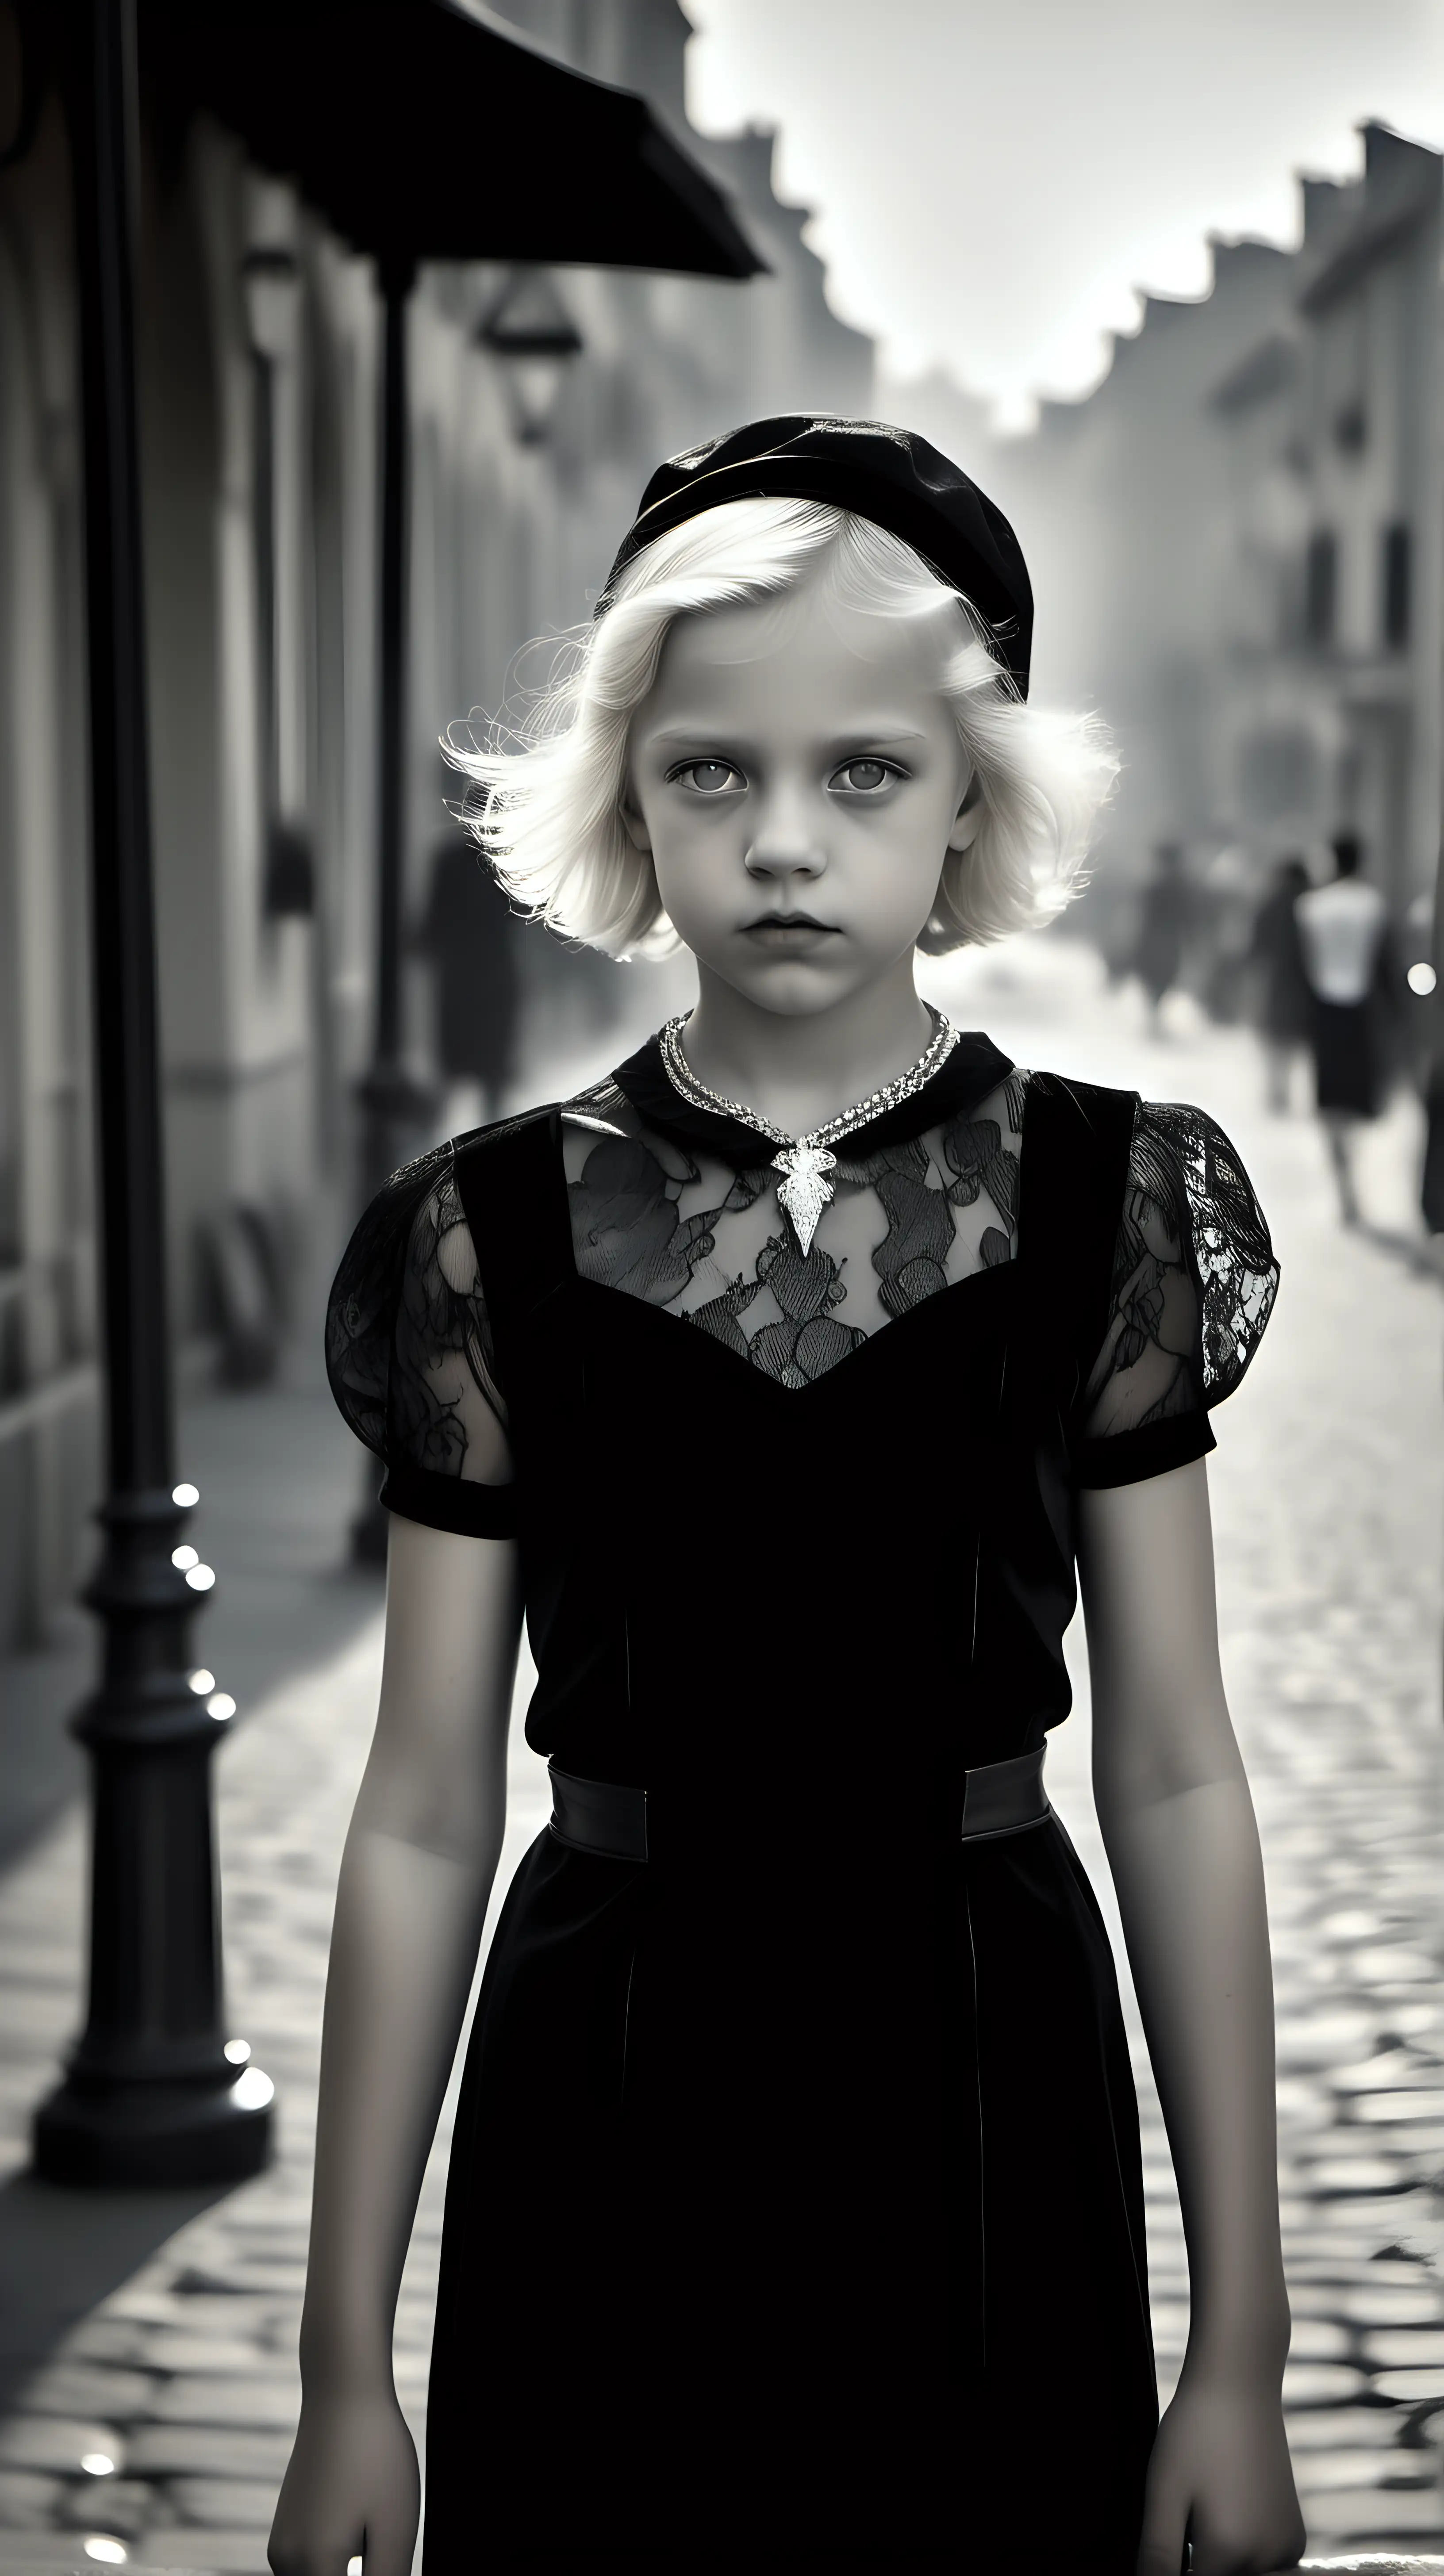 photo of a young little 8yr girl
Black and white photography
fog
diffuse light 
hd ,8k,realistic,photorealistic,photography,ultra-detailled,high resolution,Canon Eos R5,dslr,ISO 100,Shutter speed 1/1000

A wealthy young little 8yr girl, she is wearing a fancy black velvet high necked long sleeved 1930s gown, she is wearing a black leather short dress, she has white-blonde hair and pale  eyes, she is wearing a black lace hat, she is walking down a historic French city waterfront street, she has an angry expression, behind her are two younger white-blonde women in short-sleeved black 1930s voile white dress,black nylon tights, and heels stiletto, diamonds necklace, cigarette